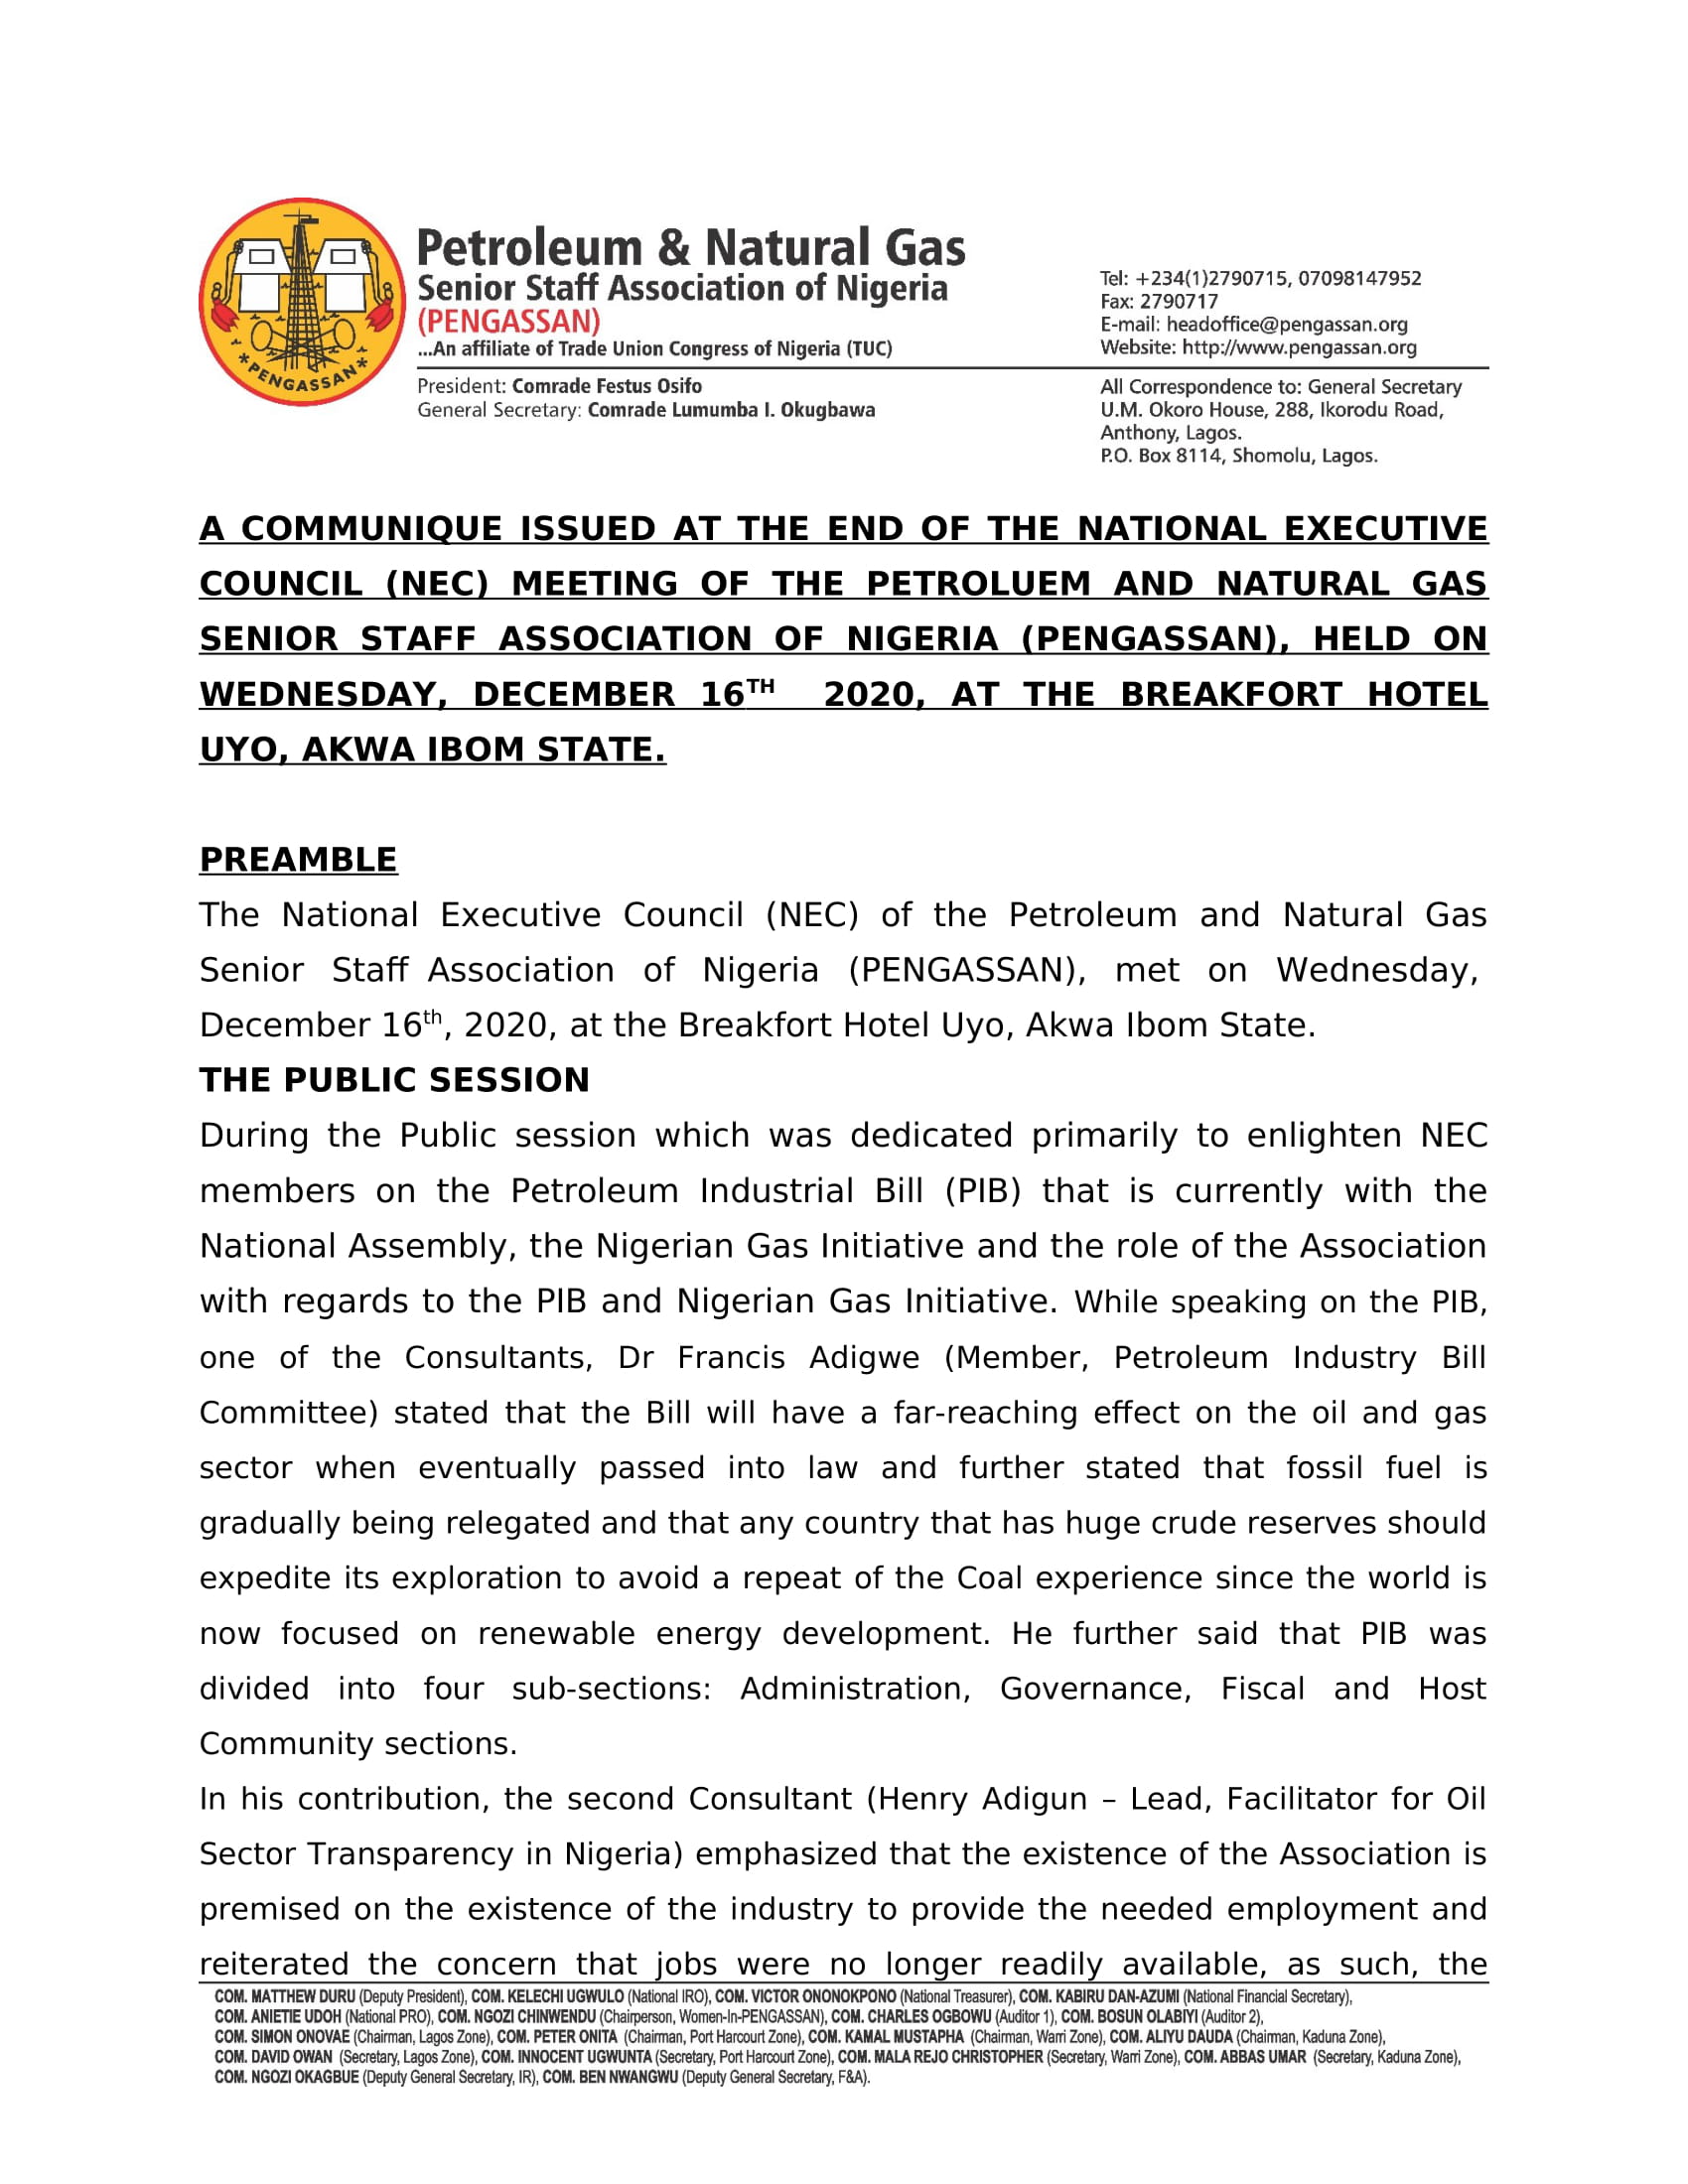 A COMMUNIQUE ISSUED AT THE END OF THE NEC MEETING OF PENGASSAN, HELD ON WEDNESDAY, DEC. 16TH 2020, UYO